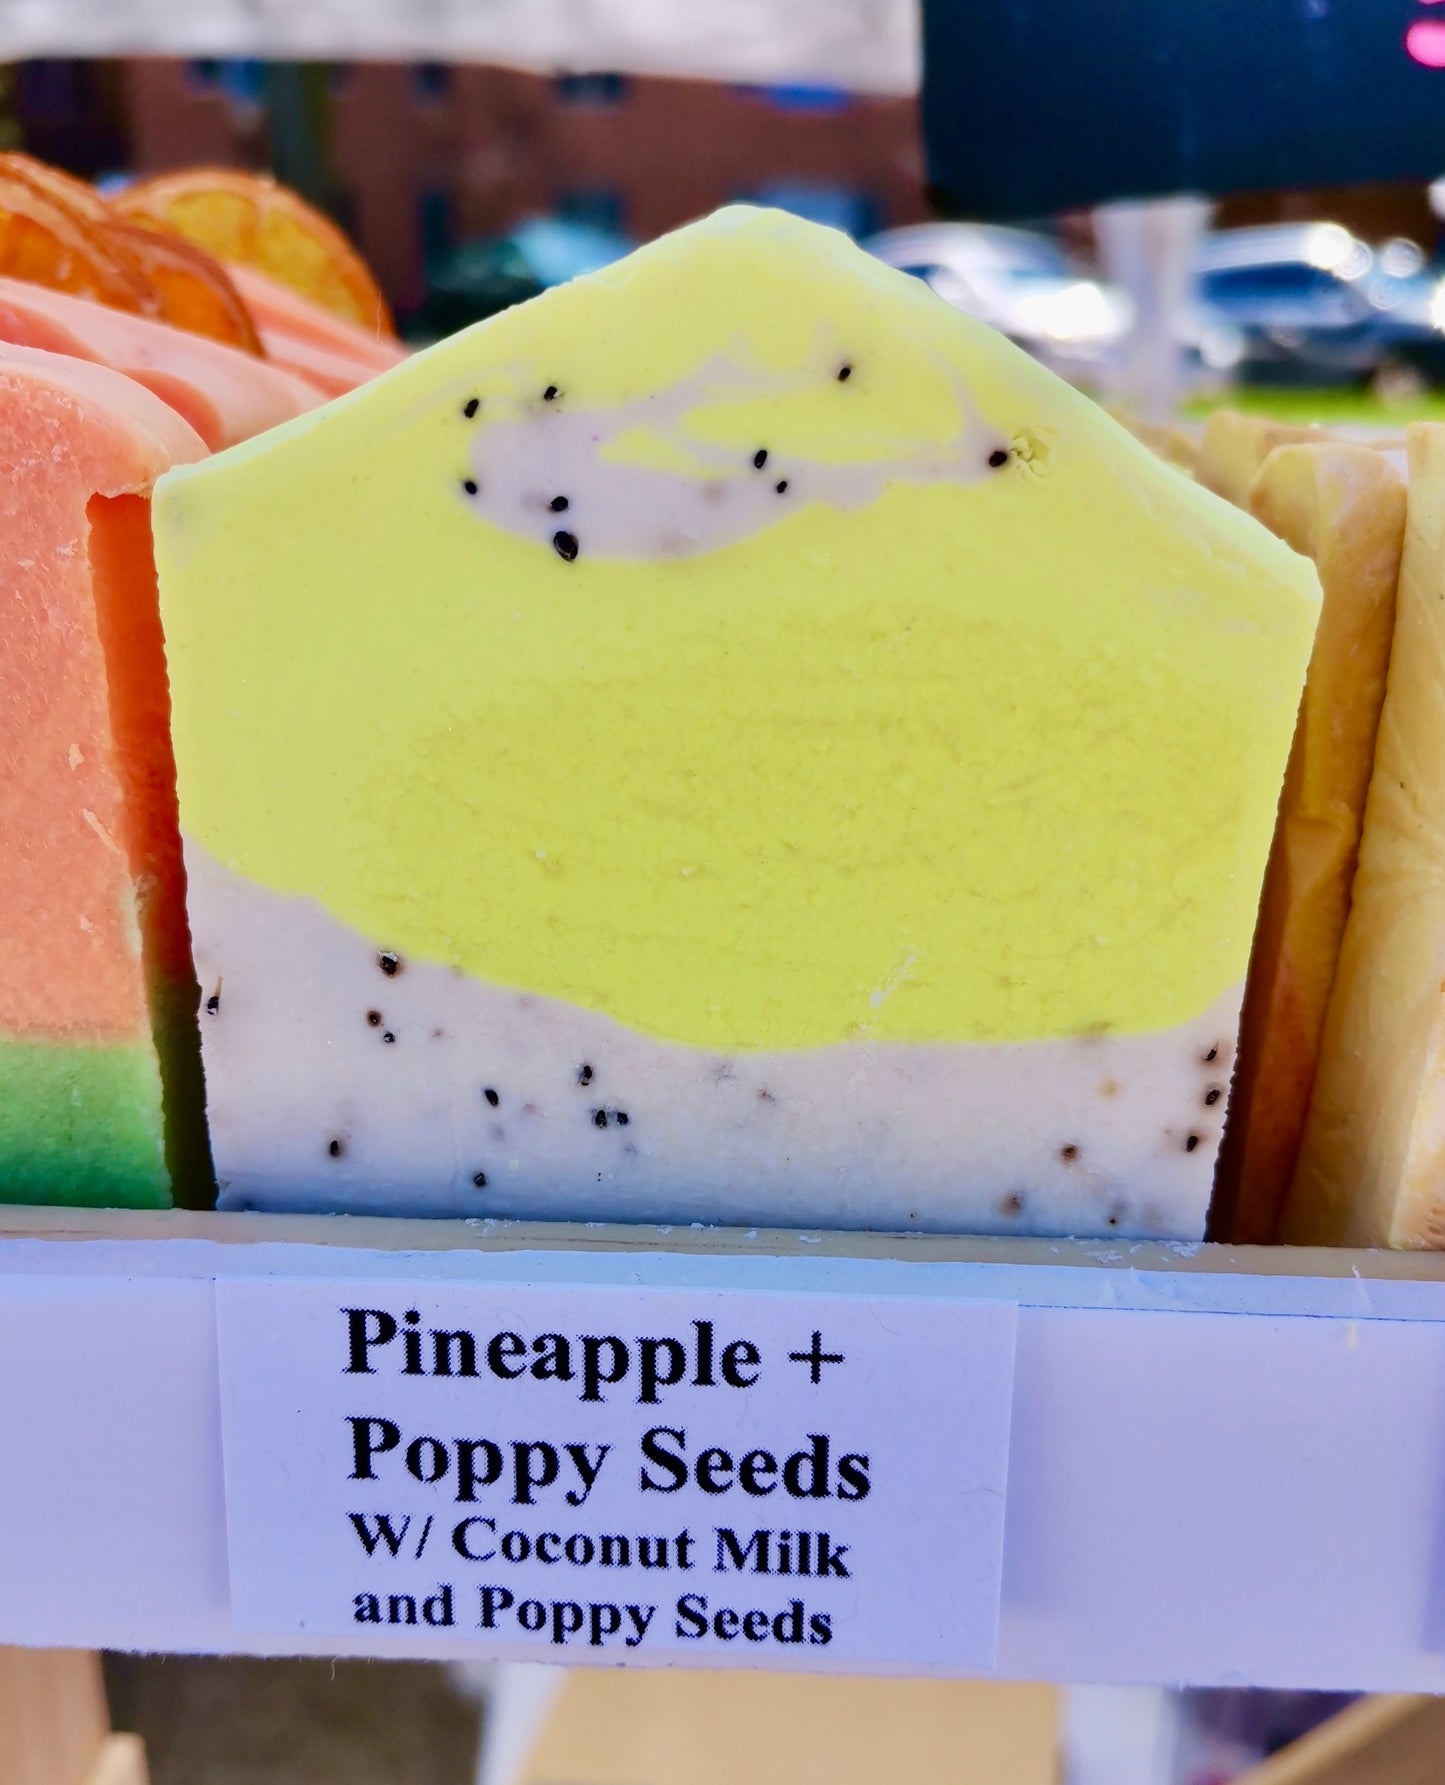 Pineapple + Poppy Seeds Hydrating Soap | Herbal & Palm Free Soap | The Vegan Potionry |